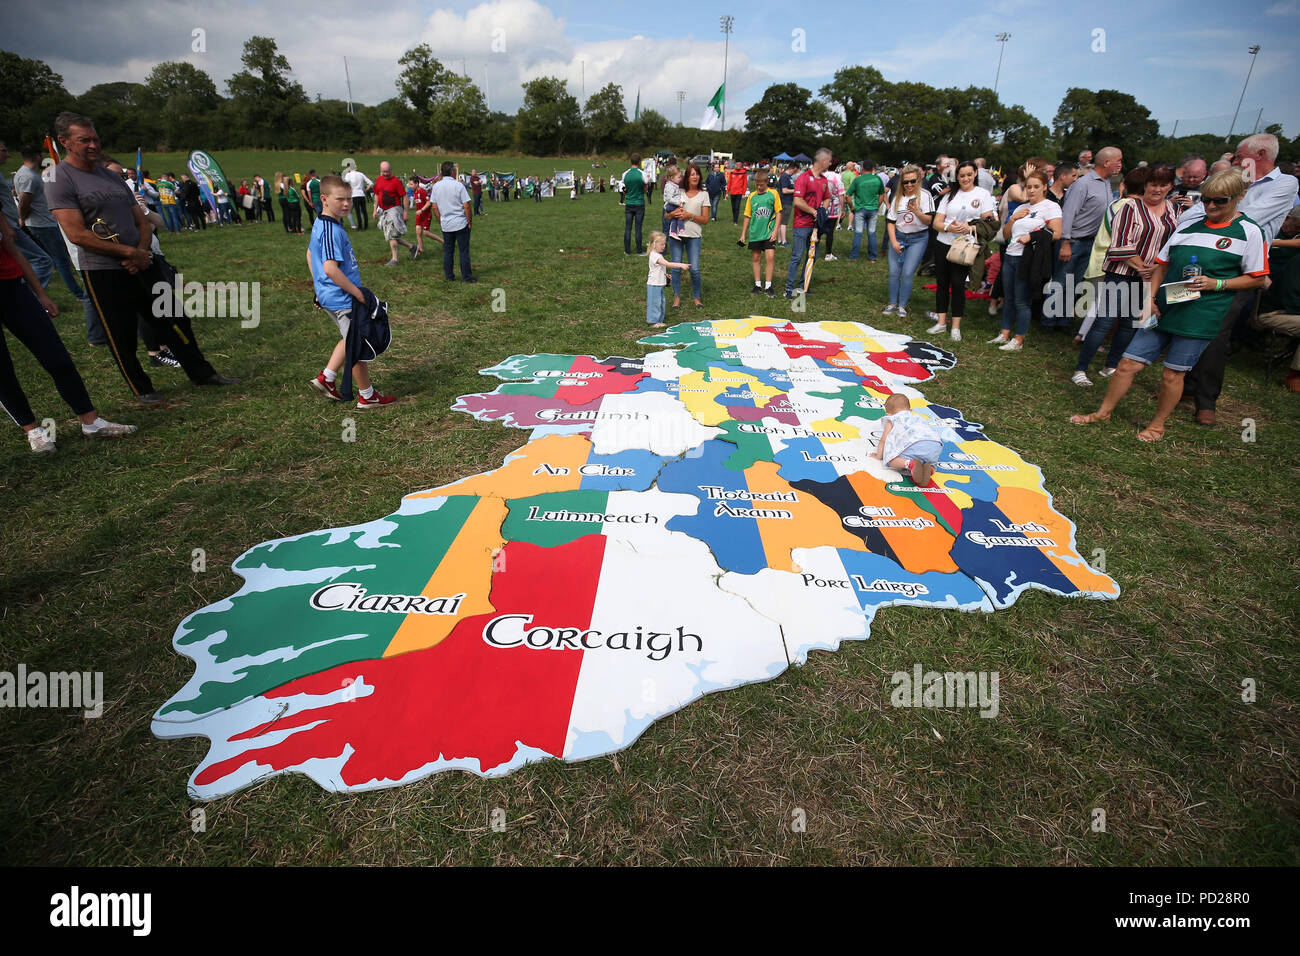 A giant jigsaw of Ireland at the 37th National Hunger Strike Commemoration in Castlewellan, County Down, Northern Ireland. Stock Photo